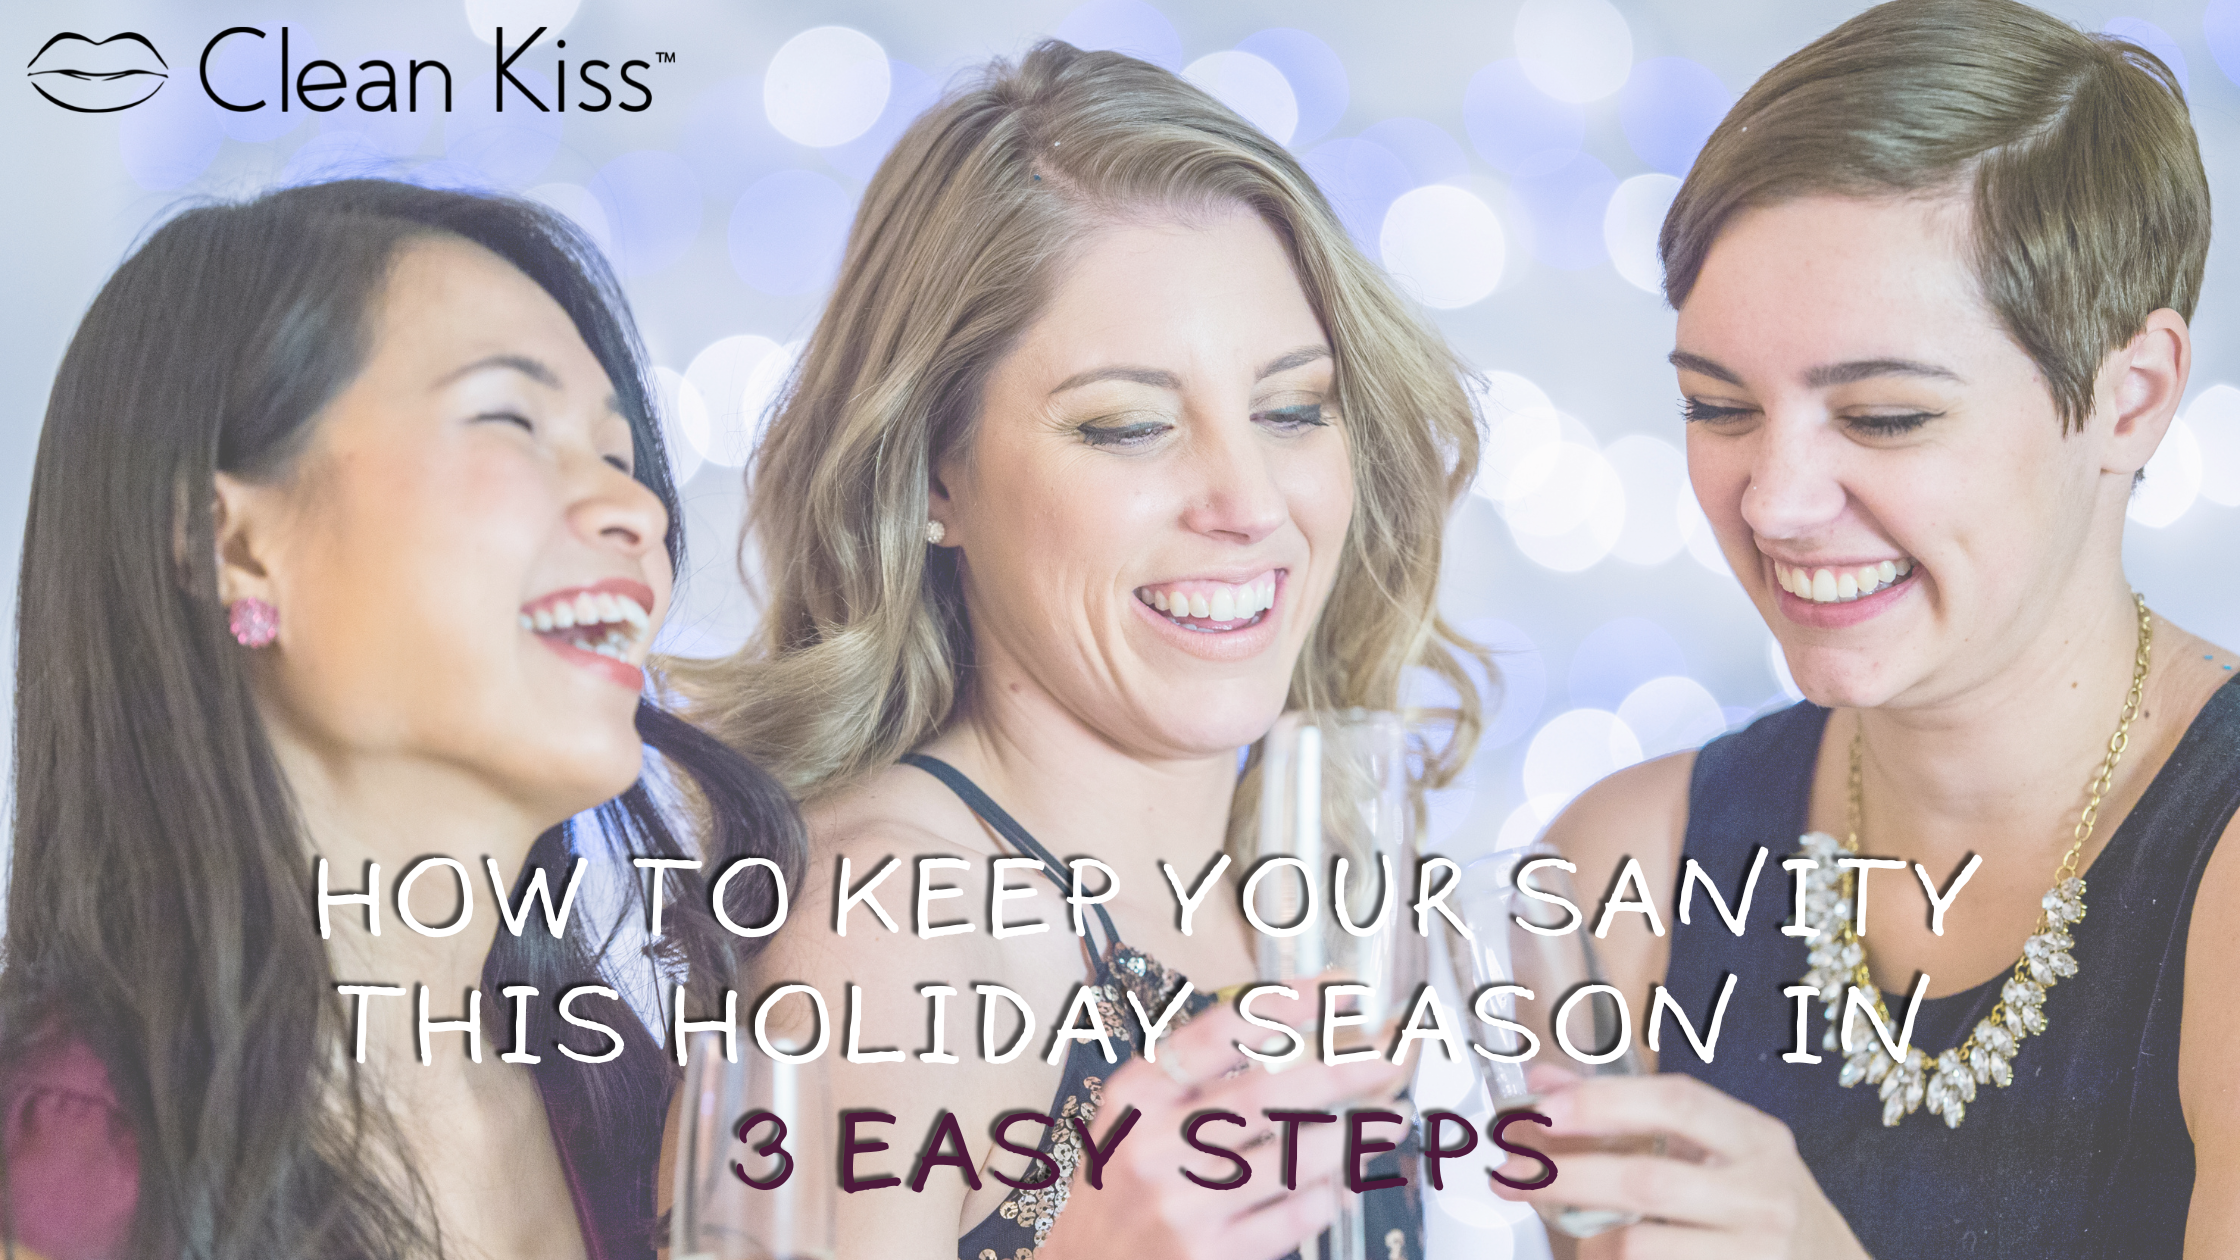 How to Keep Your Sanity this Holiday Season in 3 Easy Steps